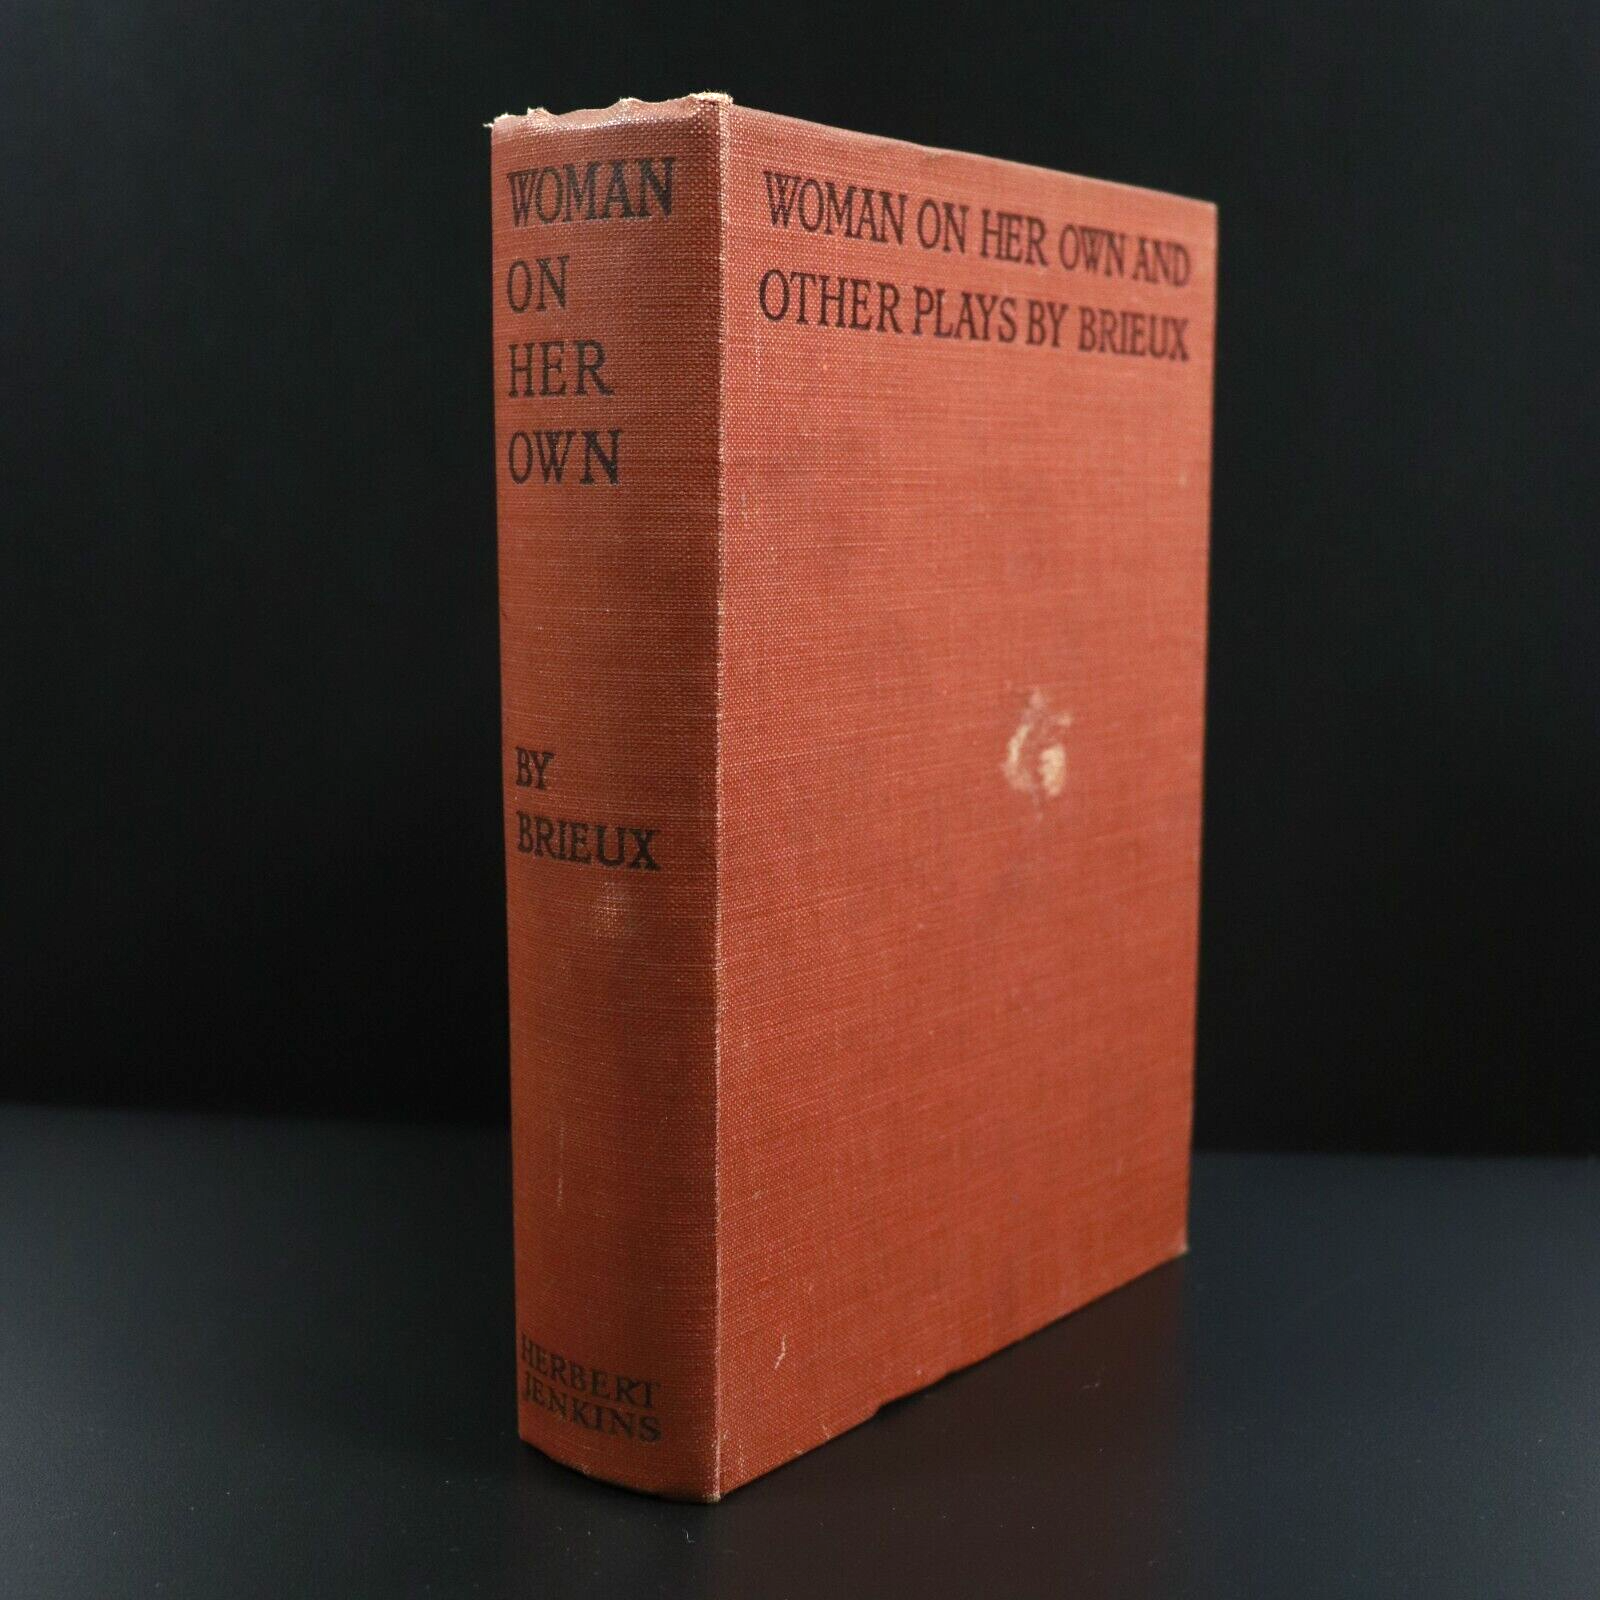 1916 Woman On Her Own 3 Plays by Brieux Antique Literature & Theatre Book